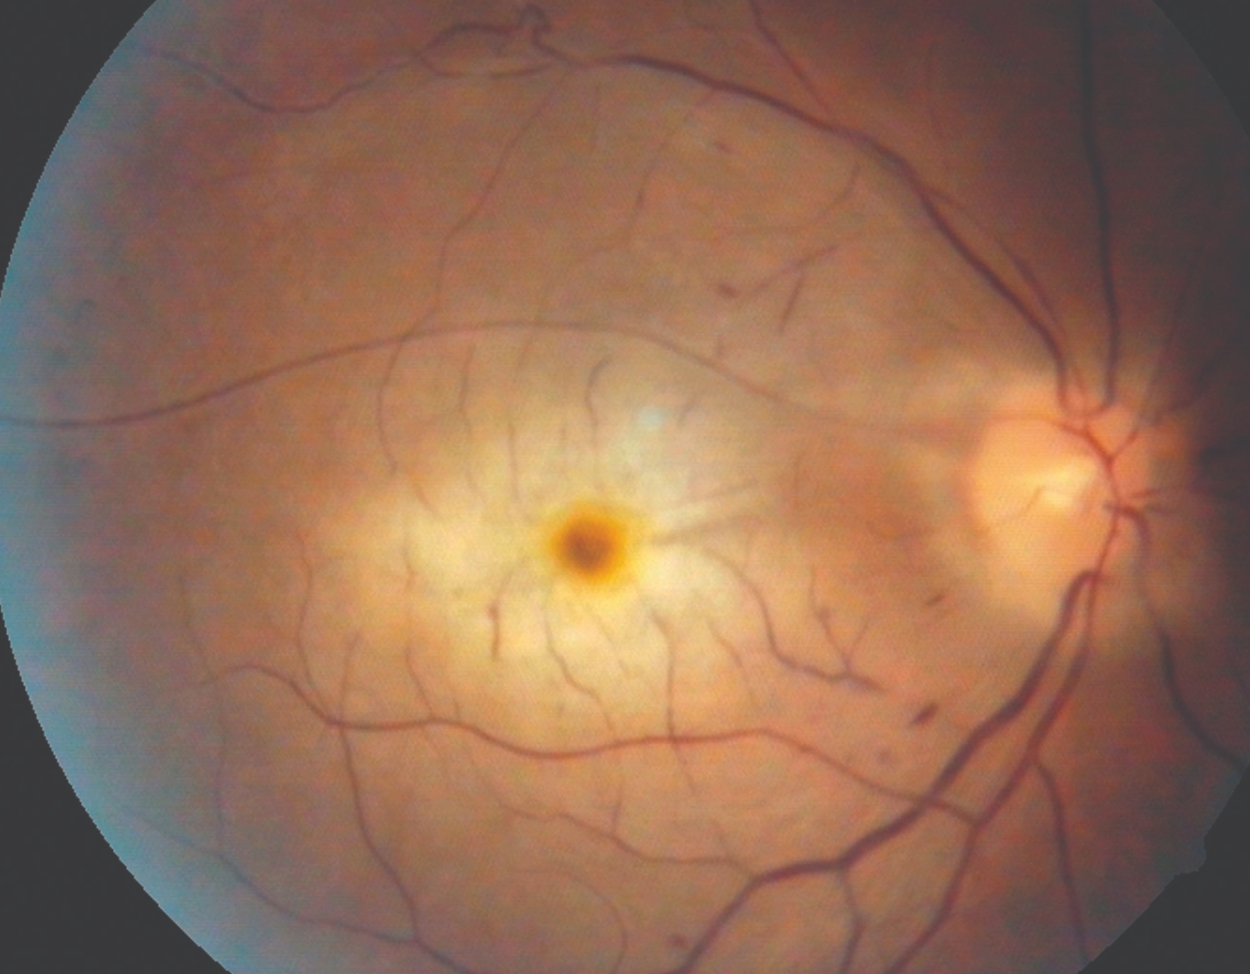 Timely recognition of central retinal arterial occlusions key for patients